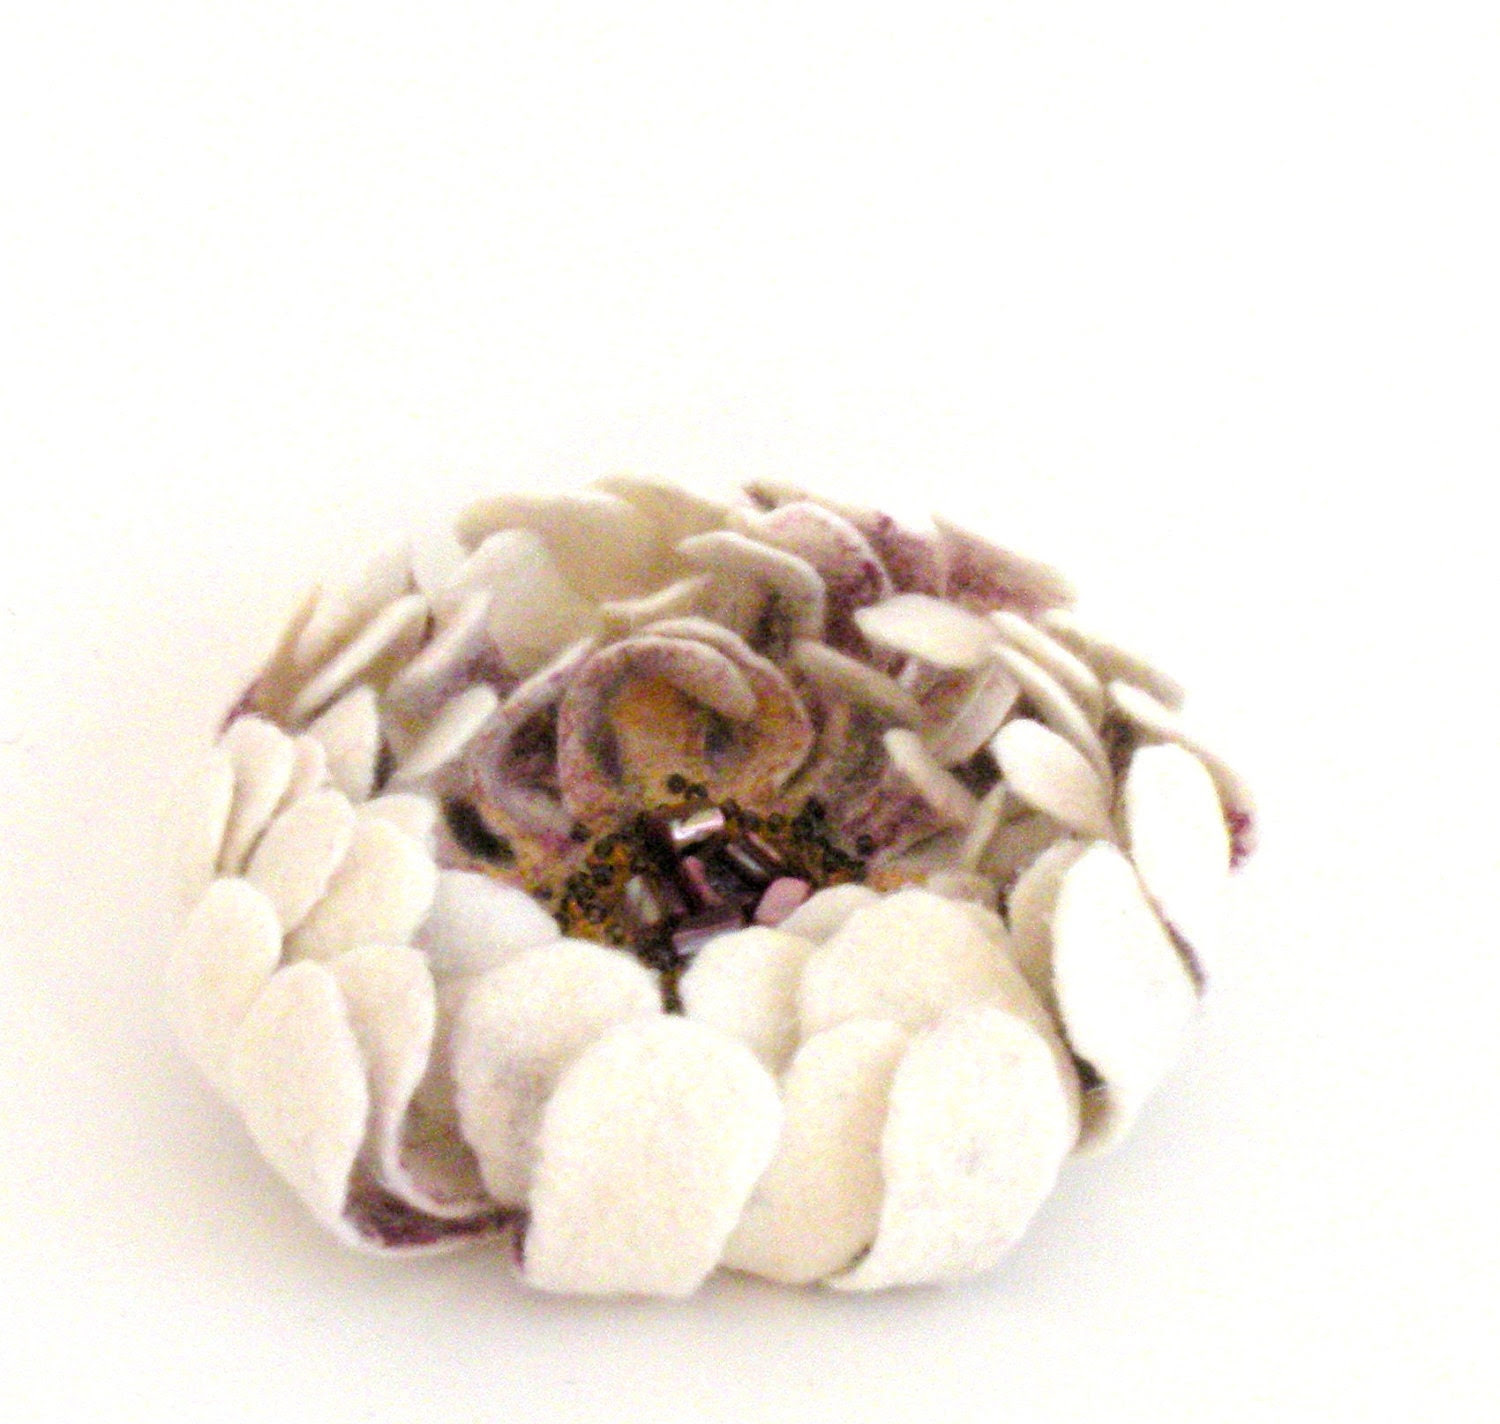 Felt flower pin brooch - natural white purple yellow flower - ready to ship - floral jewelry - bridal accessories - AgnesFelt